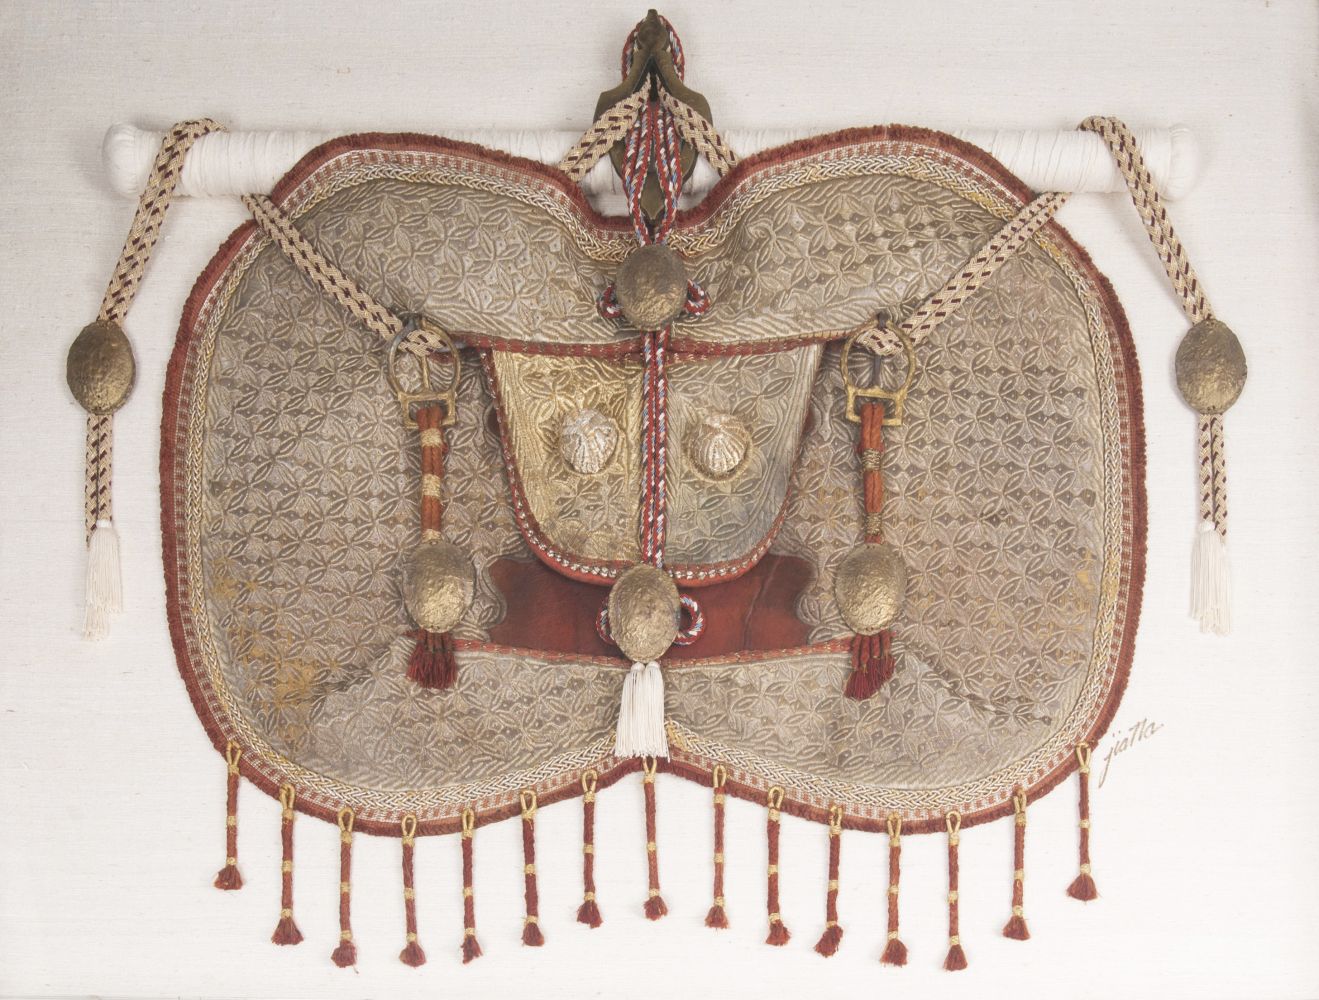 A Magnificent Ottoman Saddle Cover